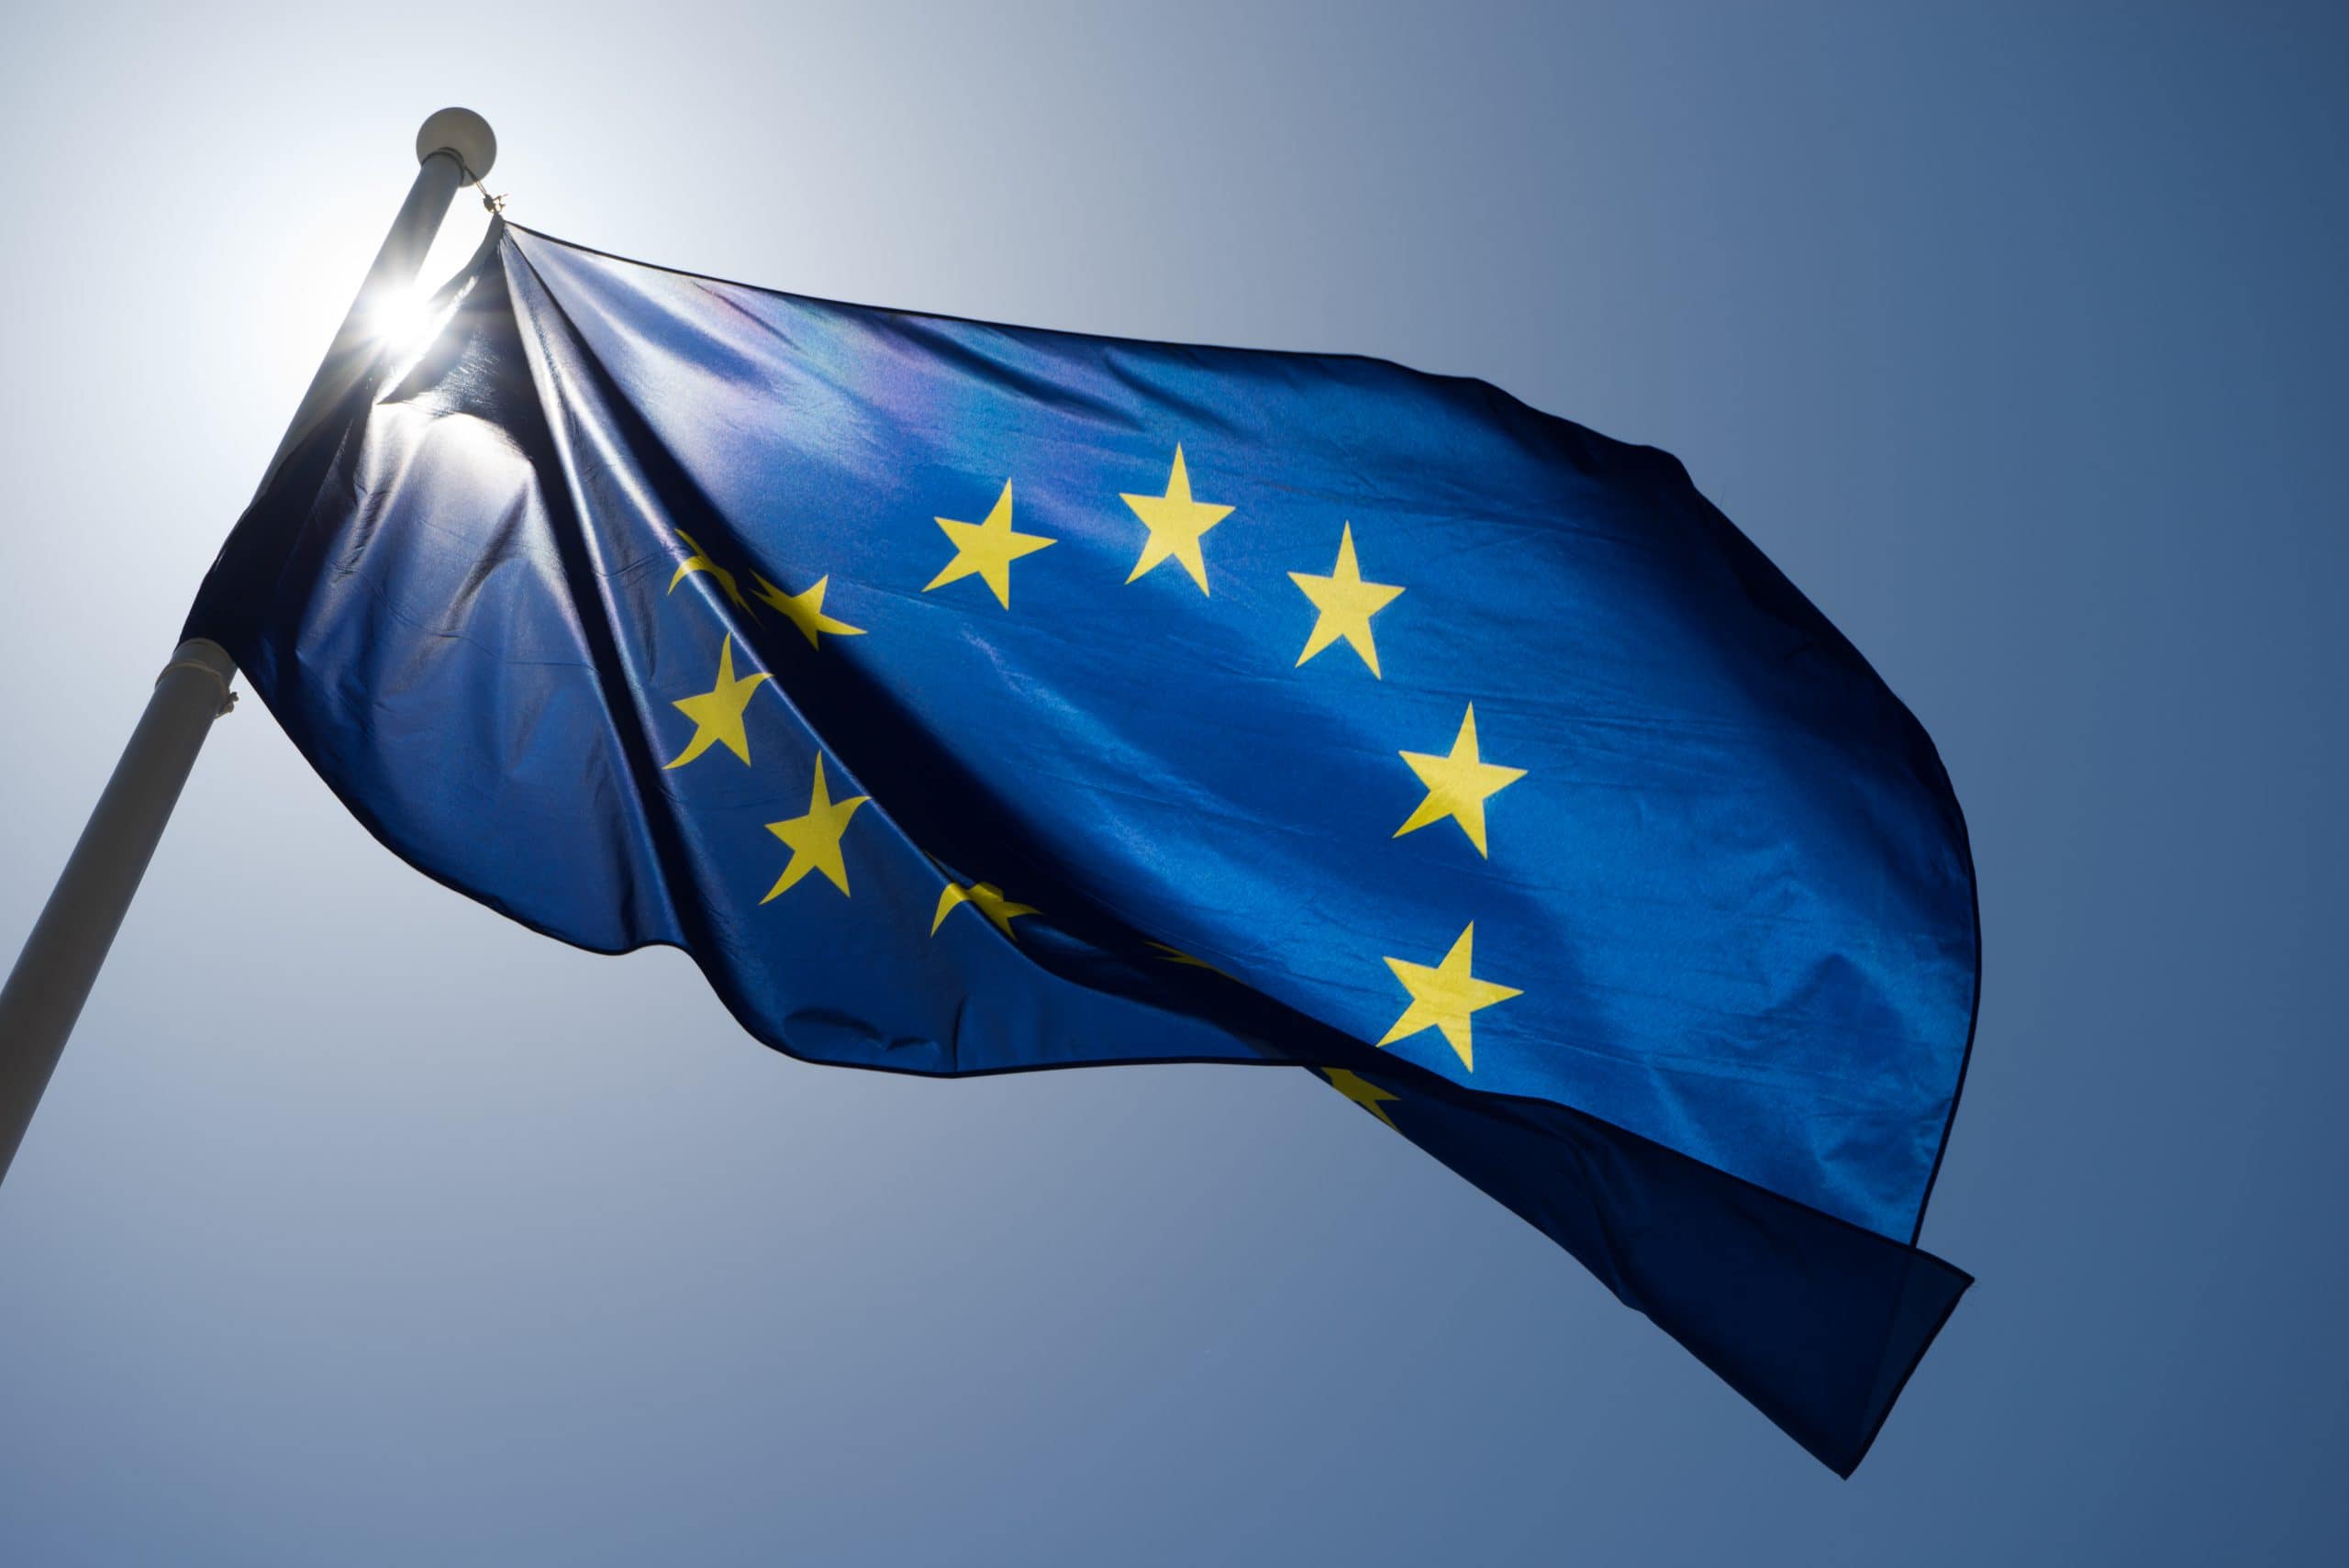 Series of images of the EU flag flying in the wind, backlight and blue sky